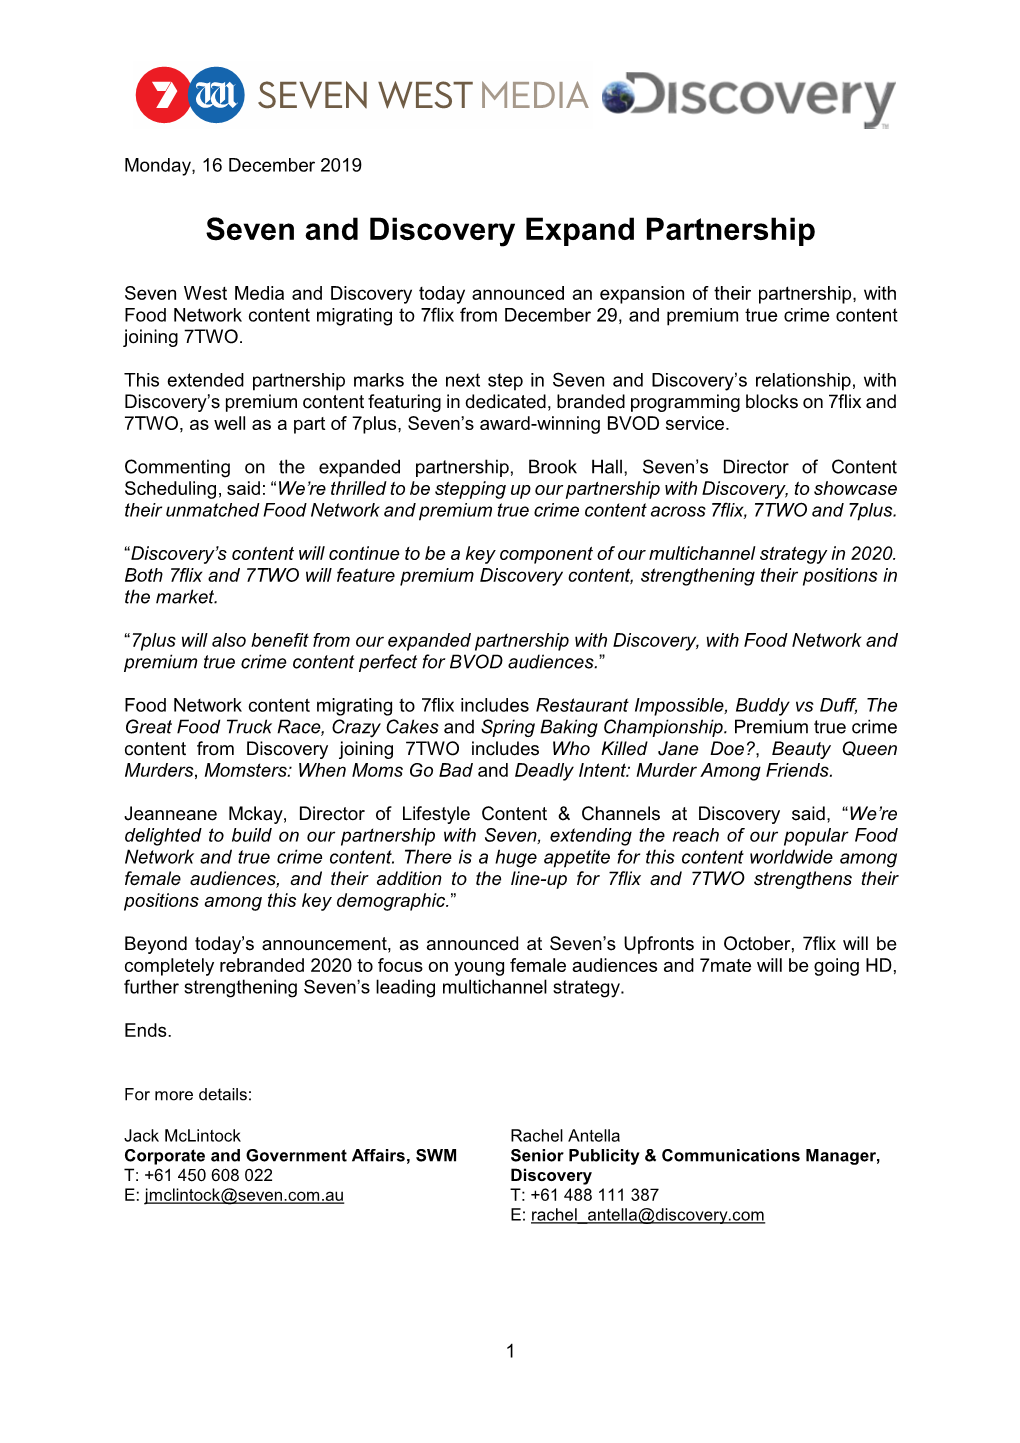 Seven and Discovery Expand Partnership